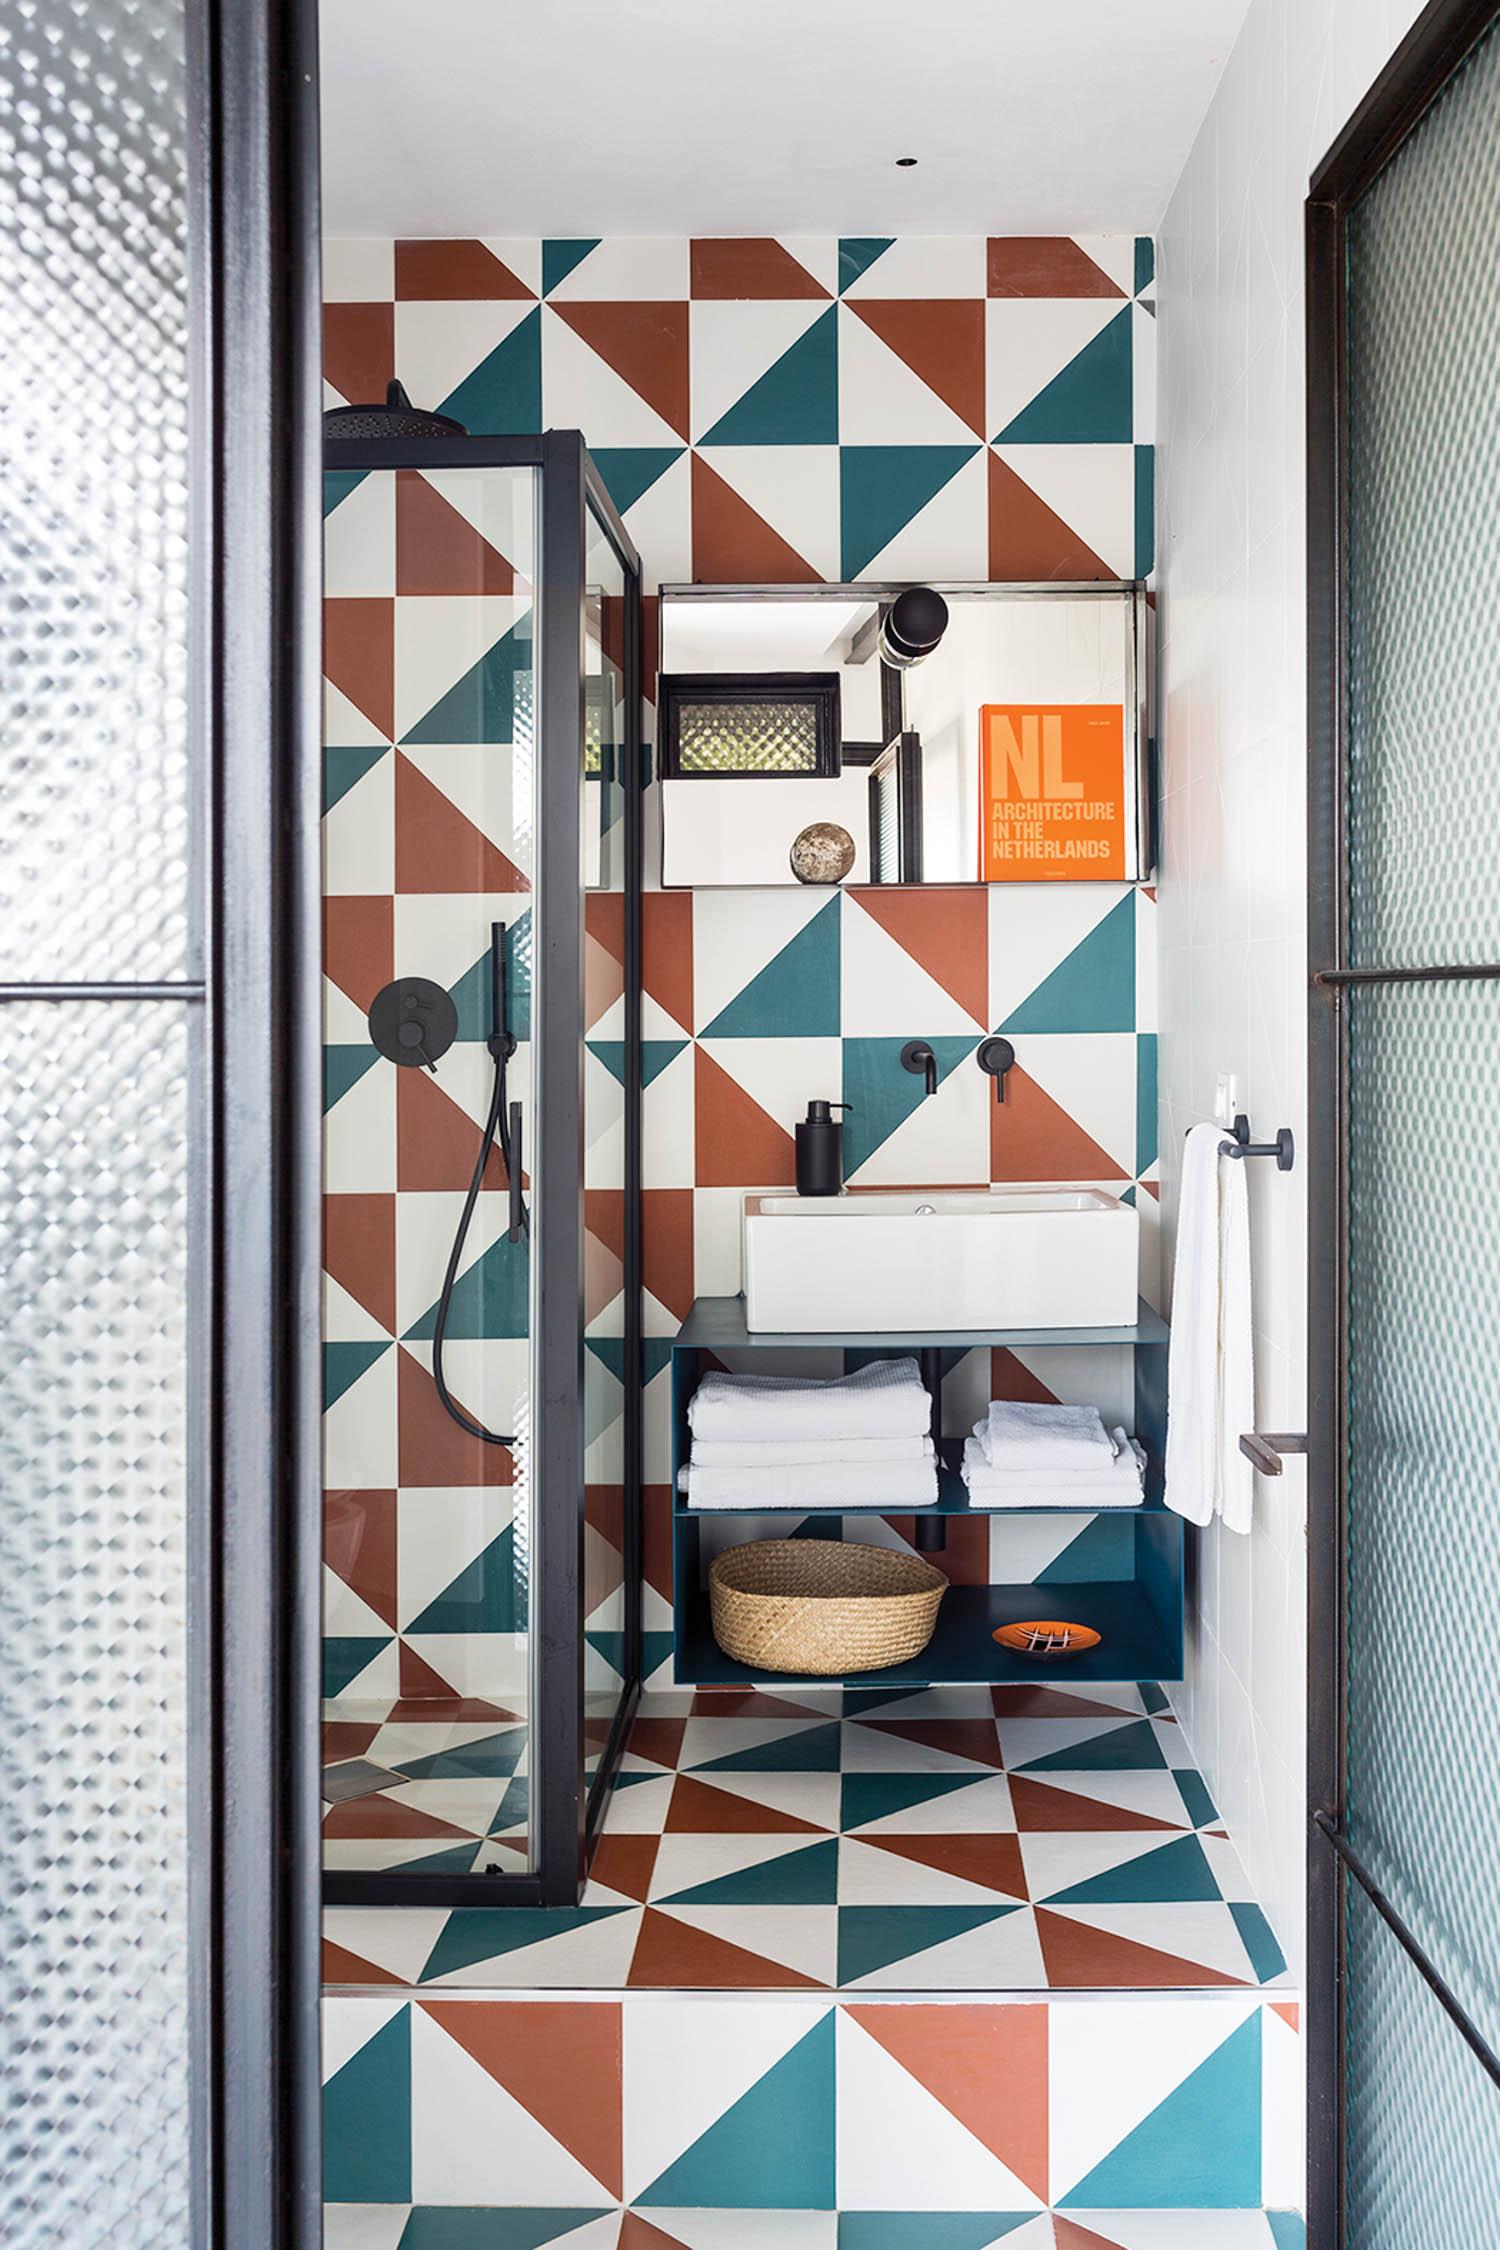 teal and orange graphic tiles mix in the bathroom of a luxury Italian home